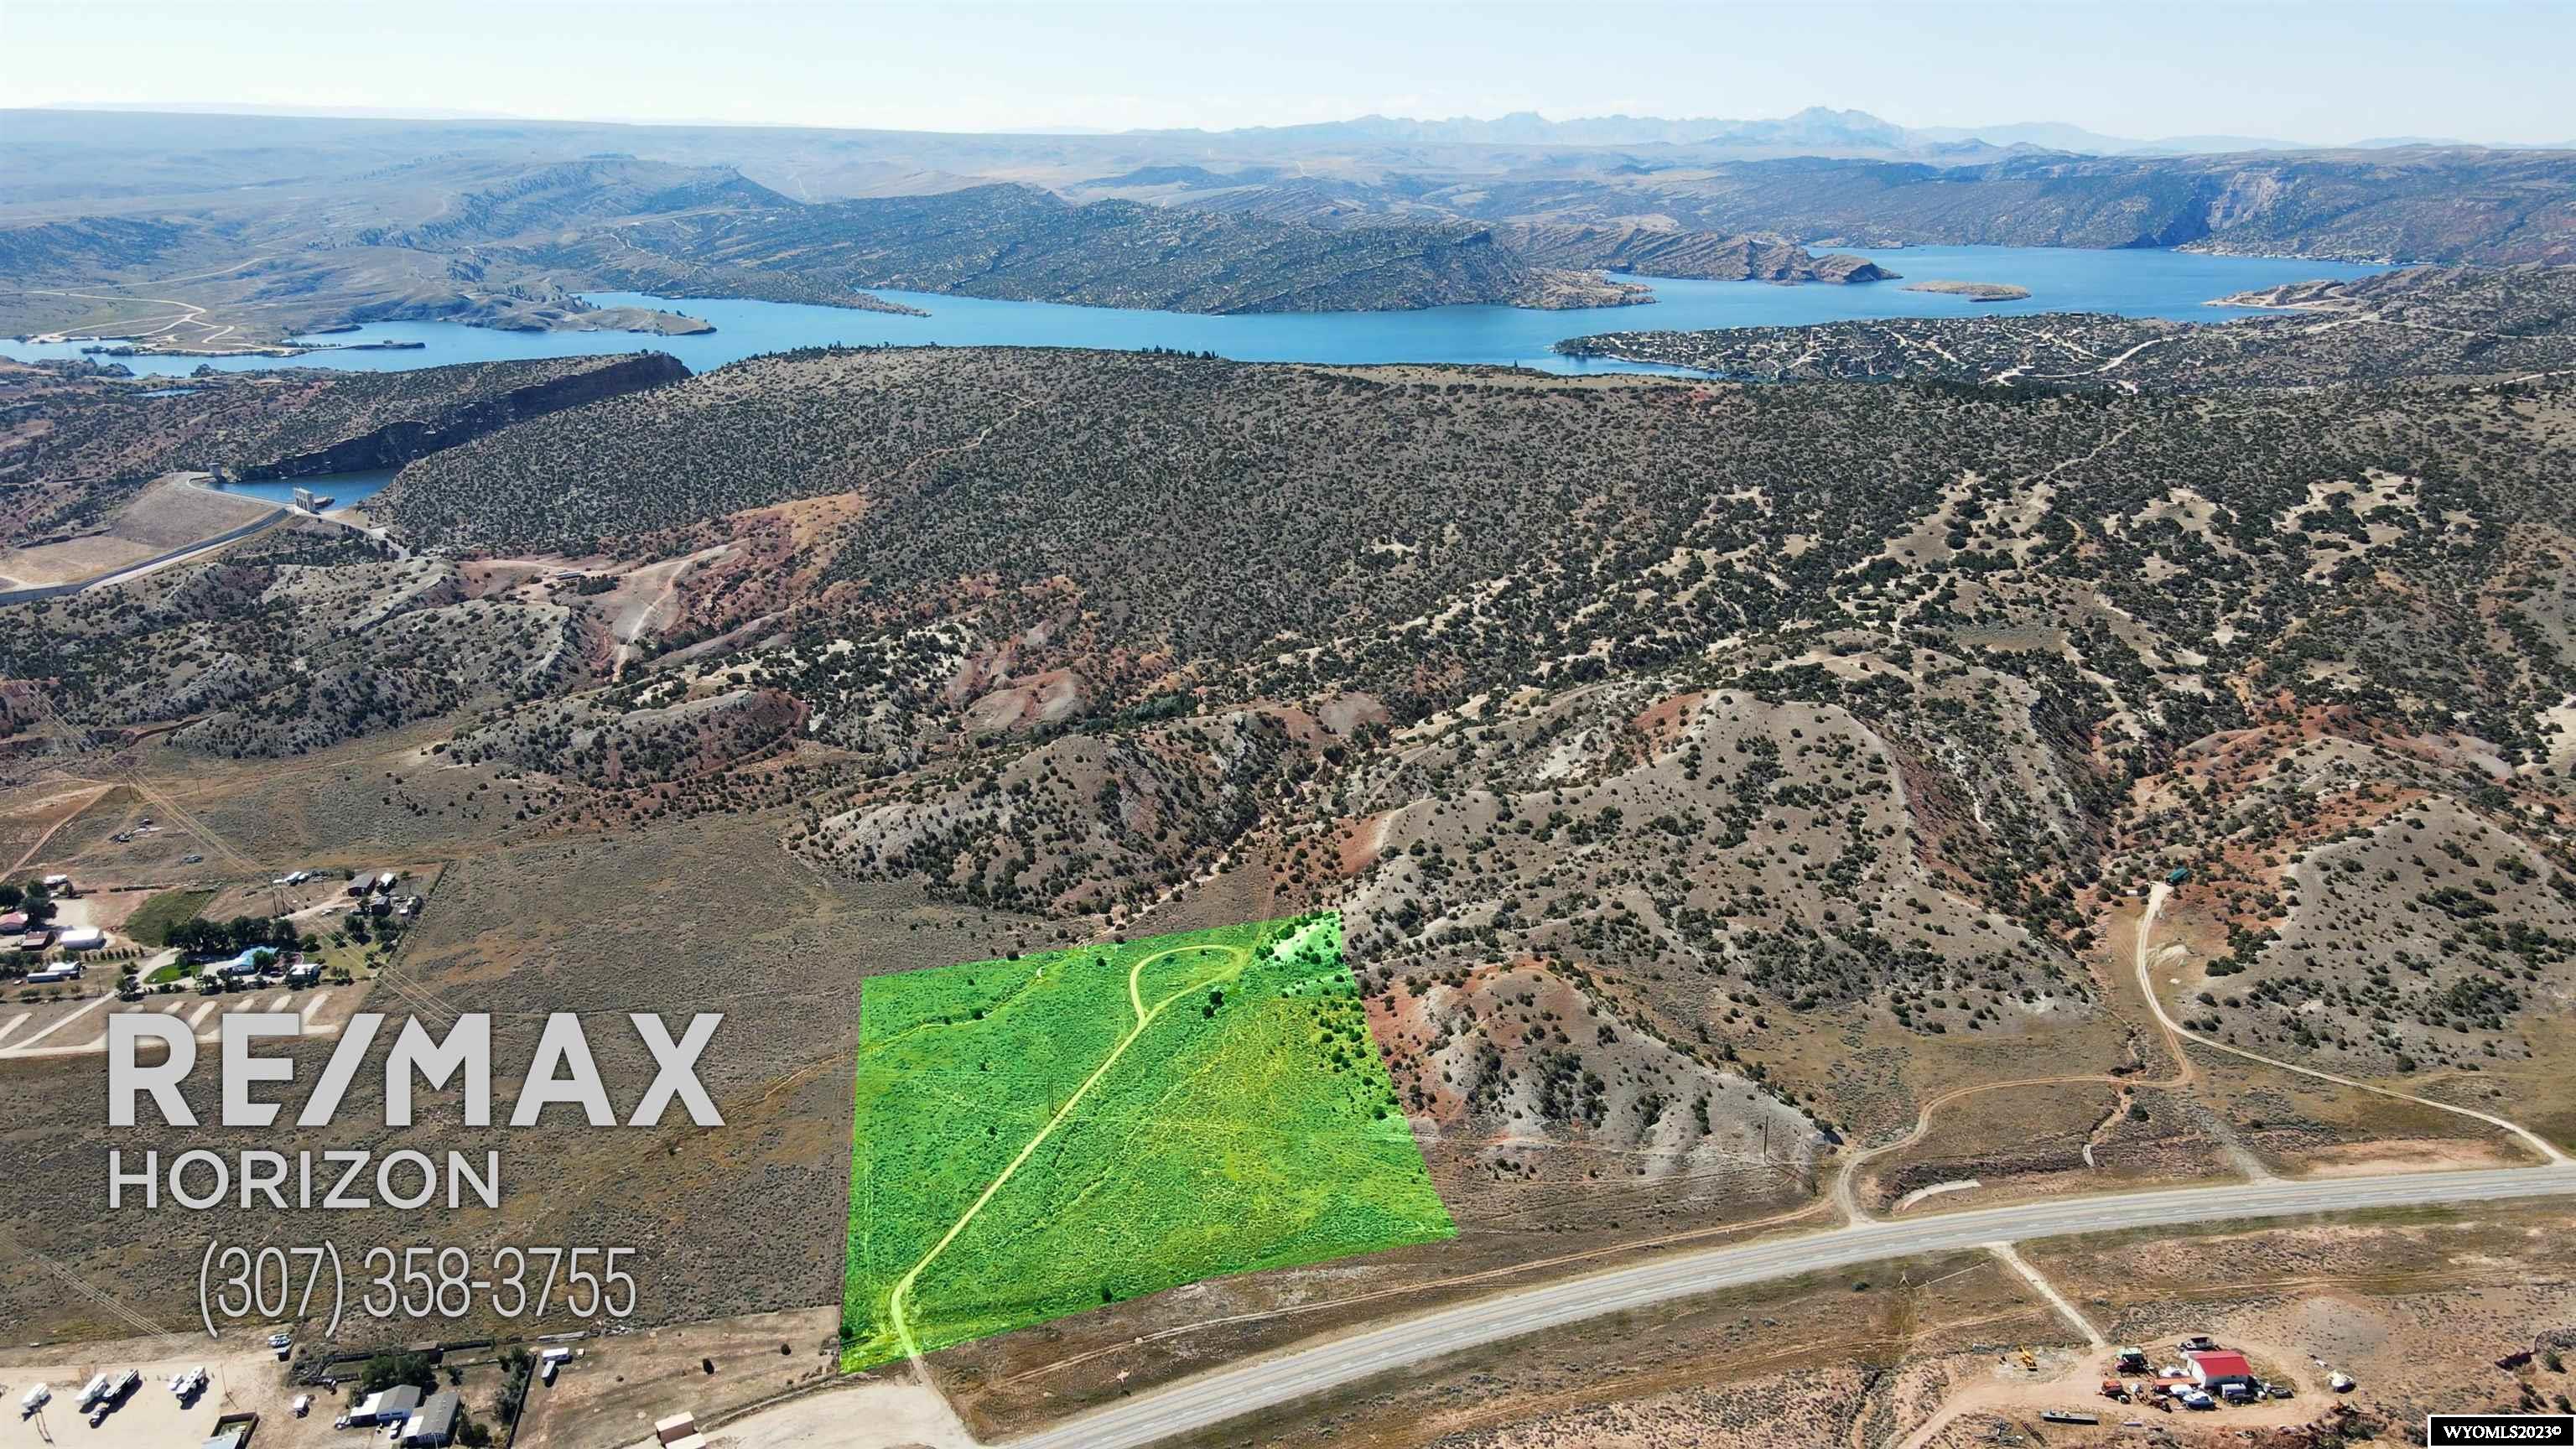 Call Ryan for more information at 307-351-1145! This 12 acre parcel has been re-zoned for commercial use near the town of Alcova! An amazing opportunity awaits the buyer for commercial development near this bustling reservoir! Located with easy access off State Highway 220, many possibilities exist here for development. With year-round access and high-visibility, this property has a lot going for it! In addition, this piece is adjacent to BLM land! Call for more information today 307-351-1145